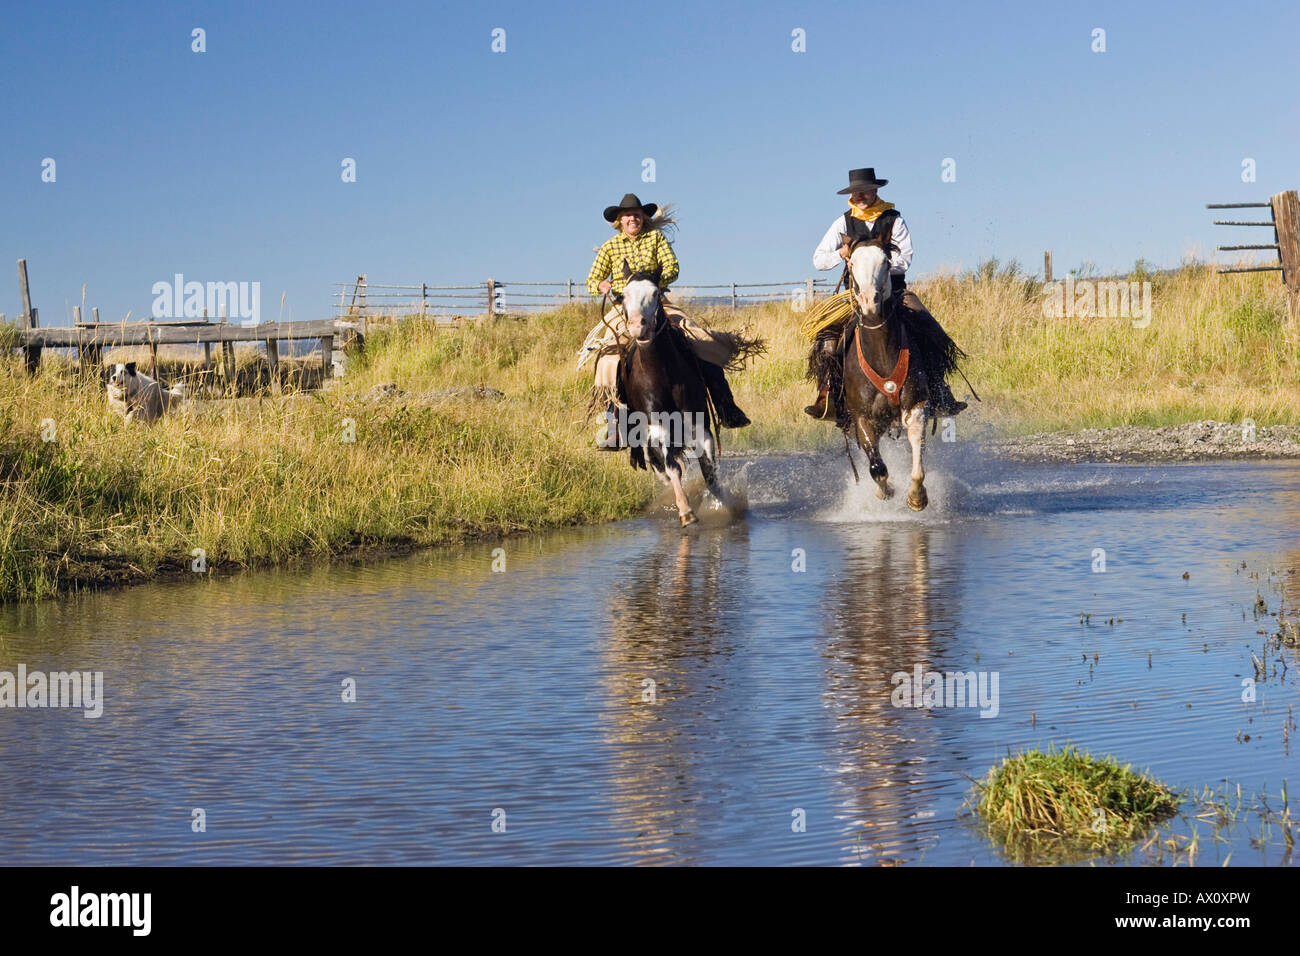 Cowgirl and cowboy riding in water, Oregon, USA Stock Photo